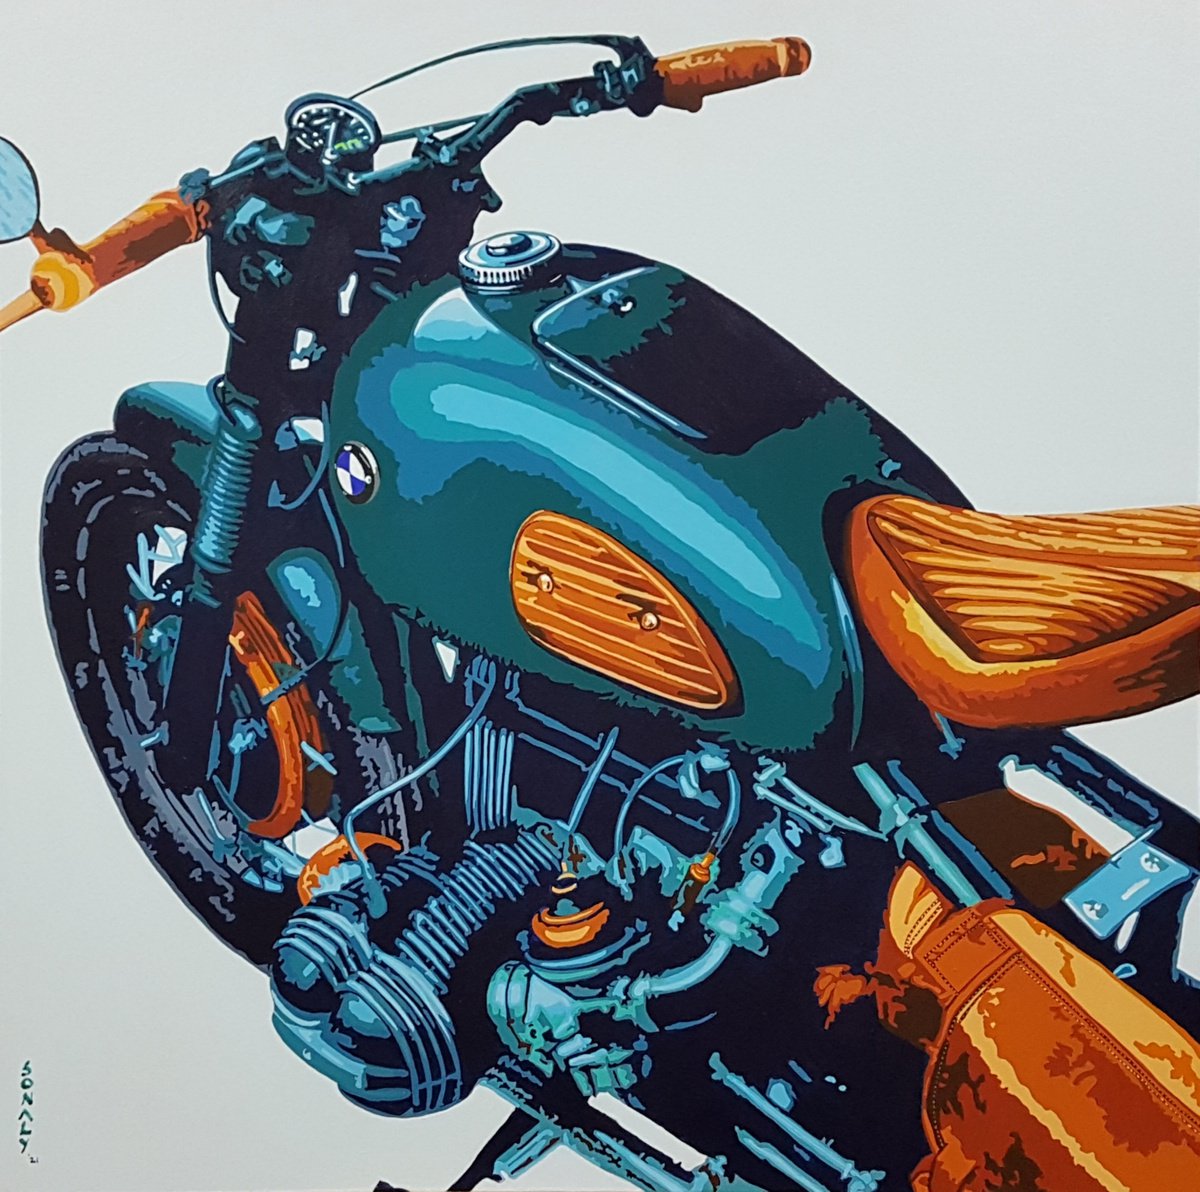 Automobiles - Classic meets Pop - BMW Motorcycle by Sonaly Gandhi